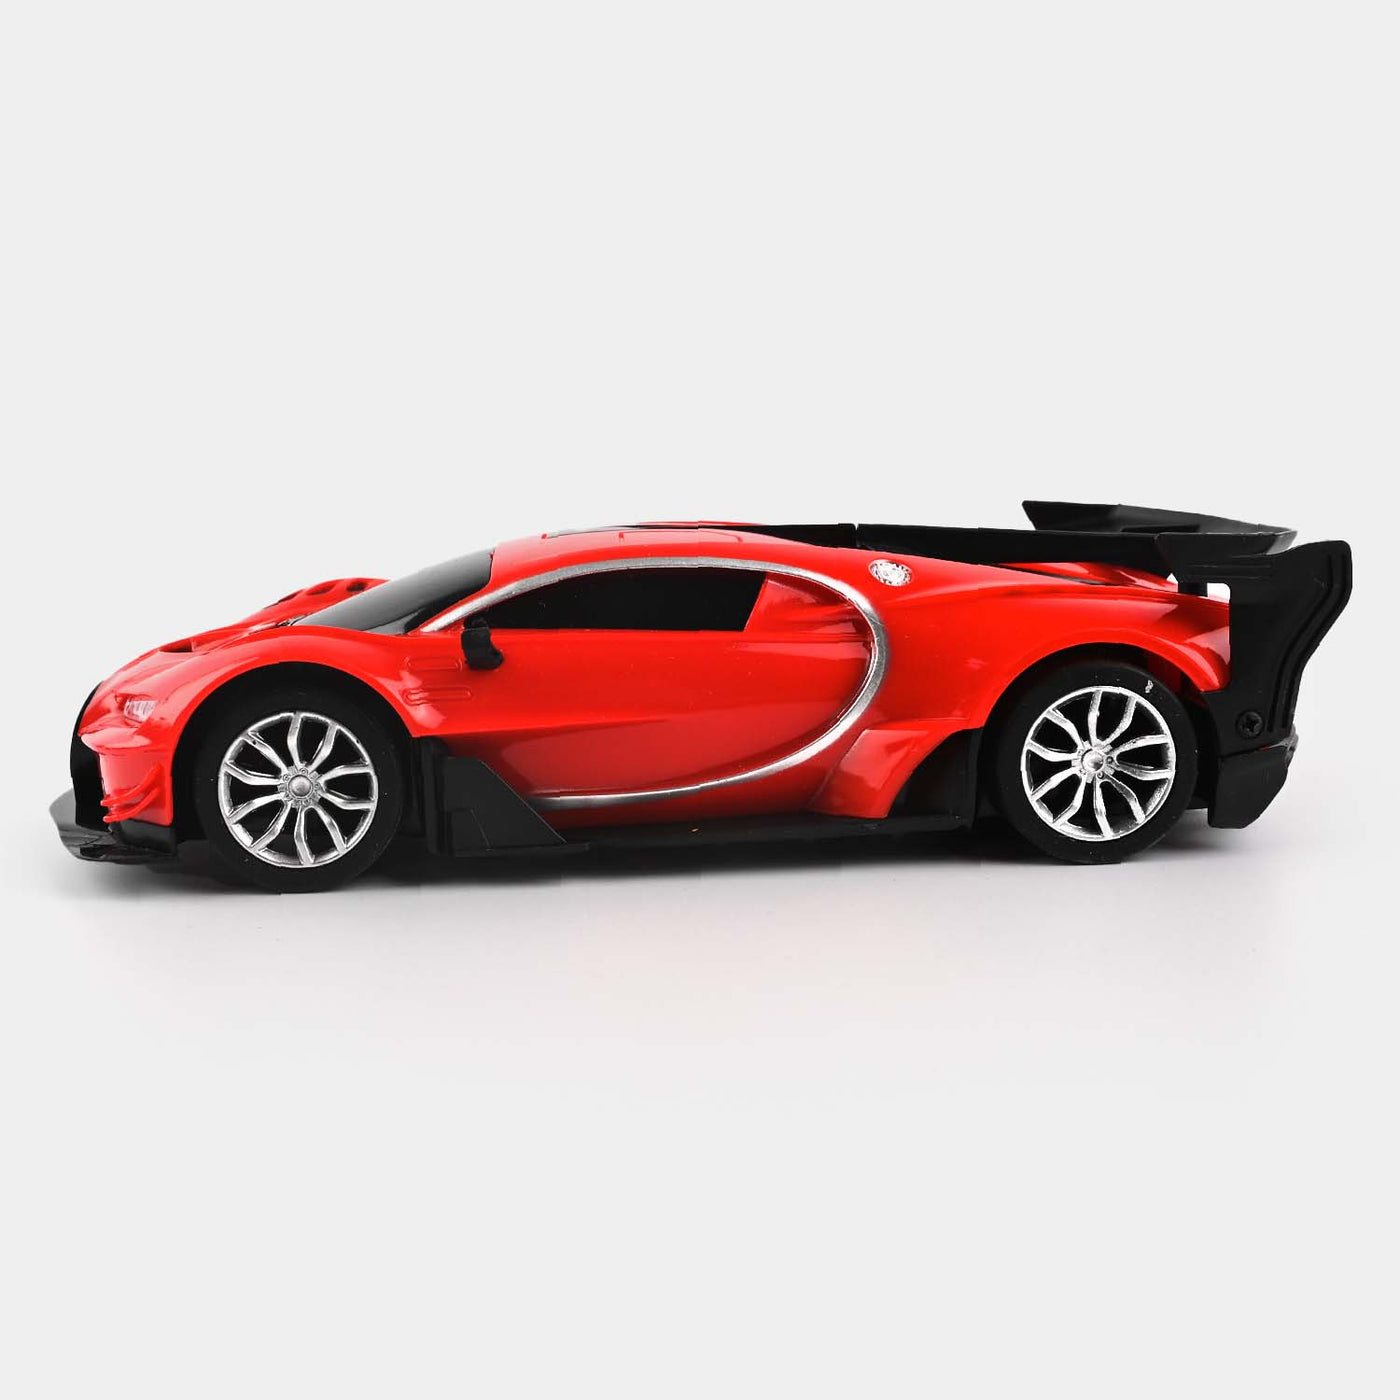 REMOTE CONTROL CAR FOR KIDS